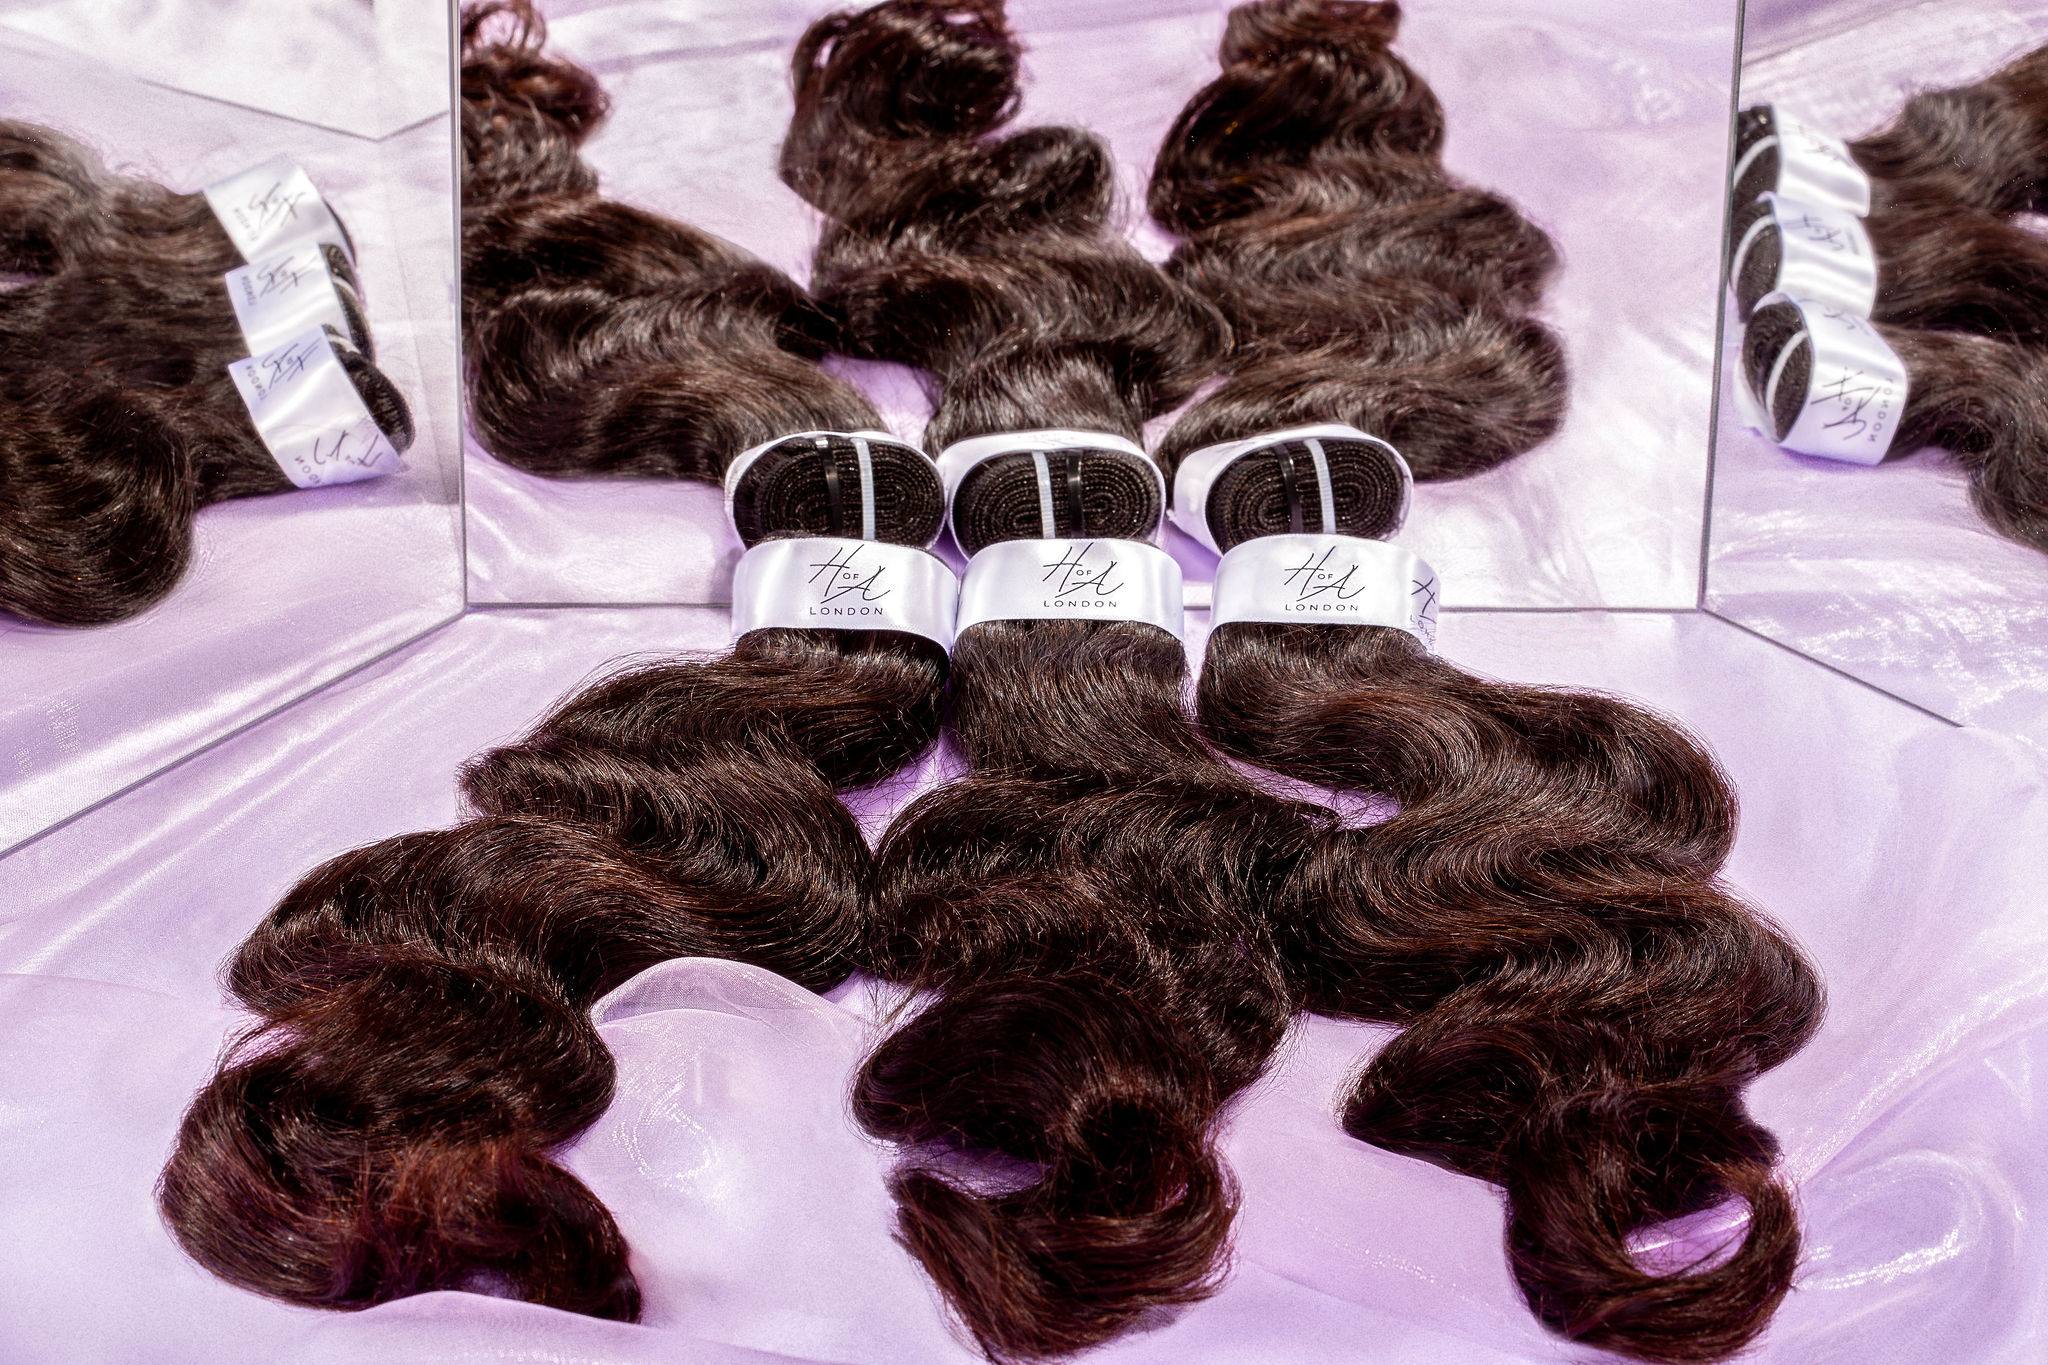 The House of Allure London, Raw Hair Uk, Deep Wave Hair, Cambodian Hair, Raw Vietnamese, Next Day Delivery Hair UK